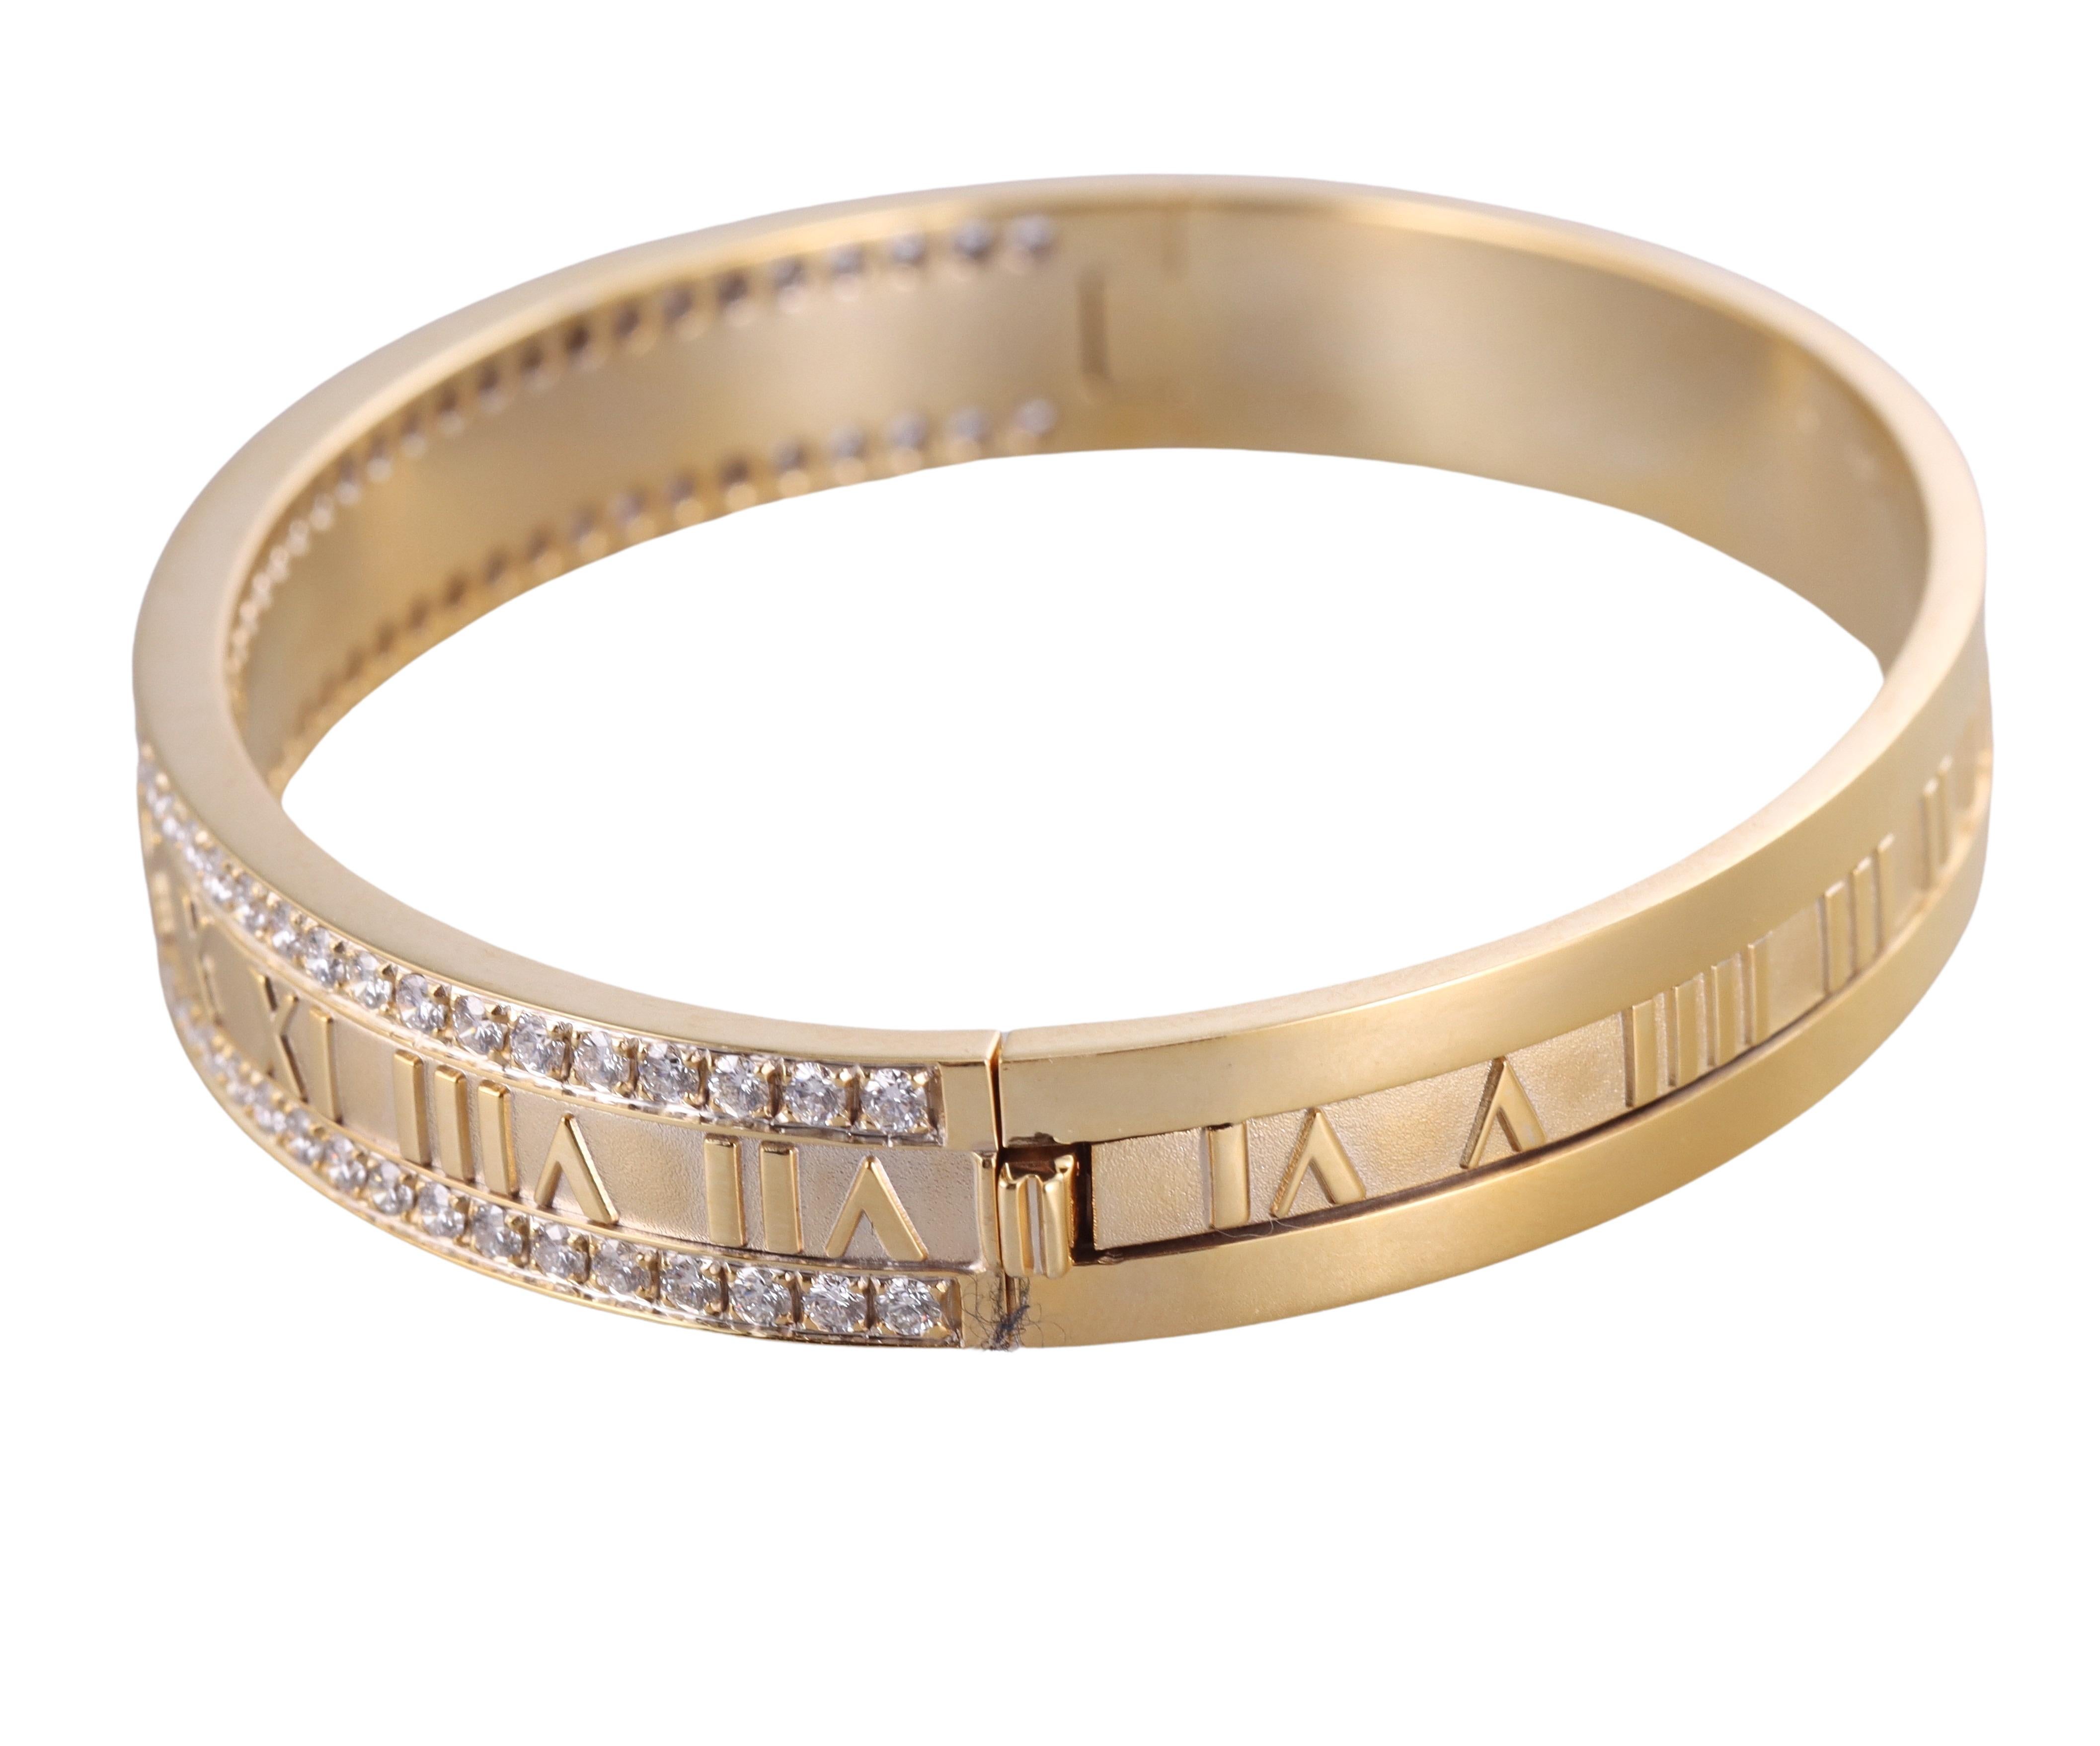 Tiffany & Co Atlas Diamond Bangle Bracelet In Excellent Condition For Sale In New York, NY